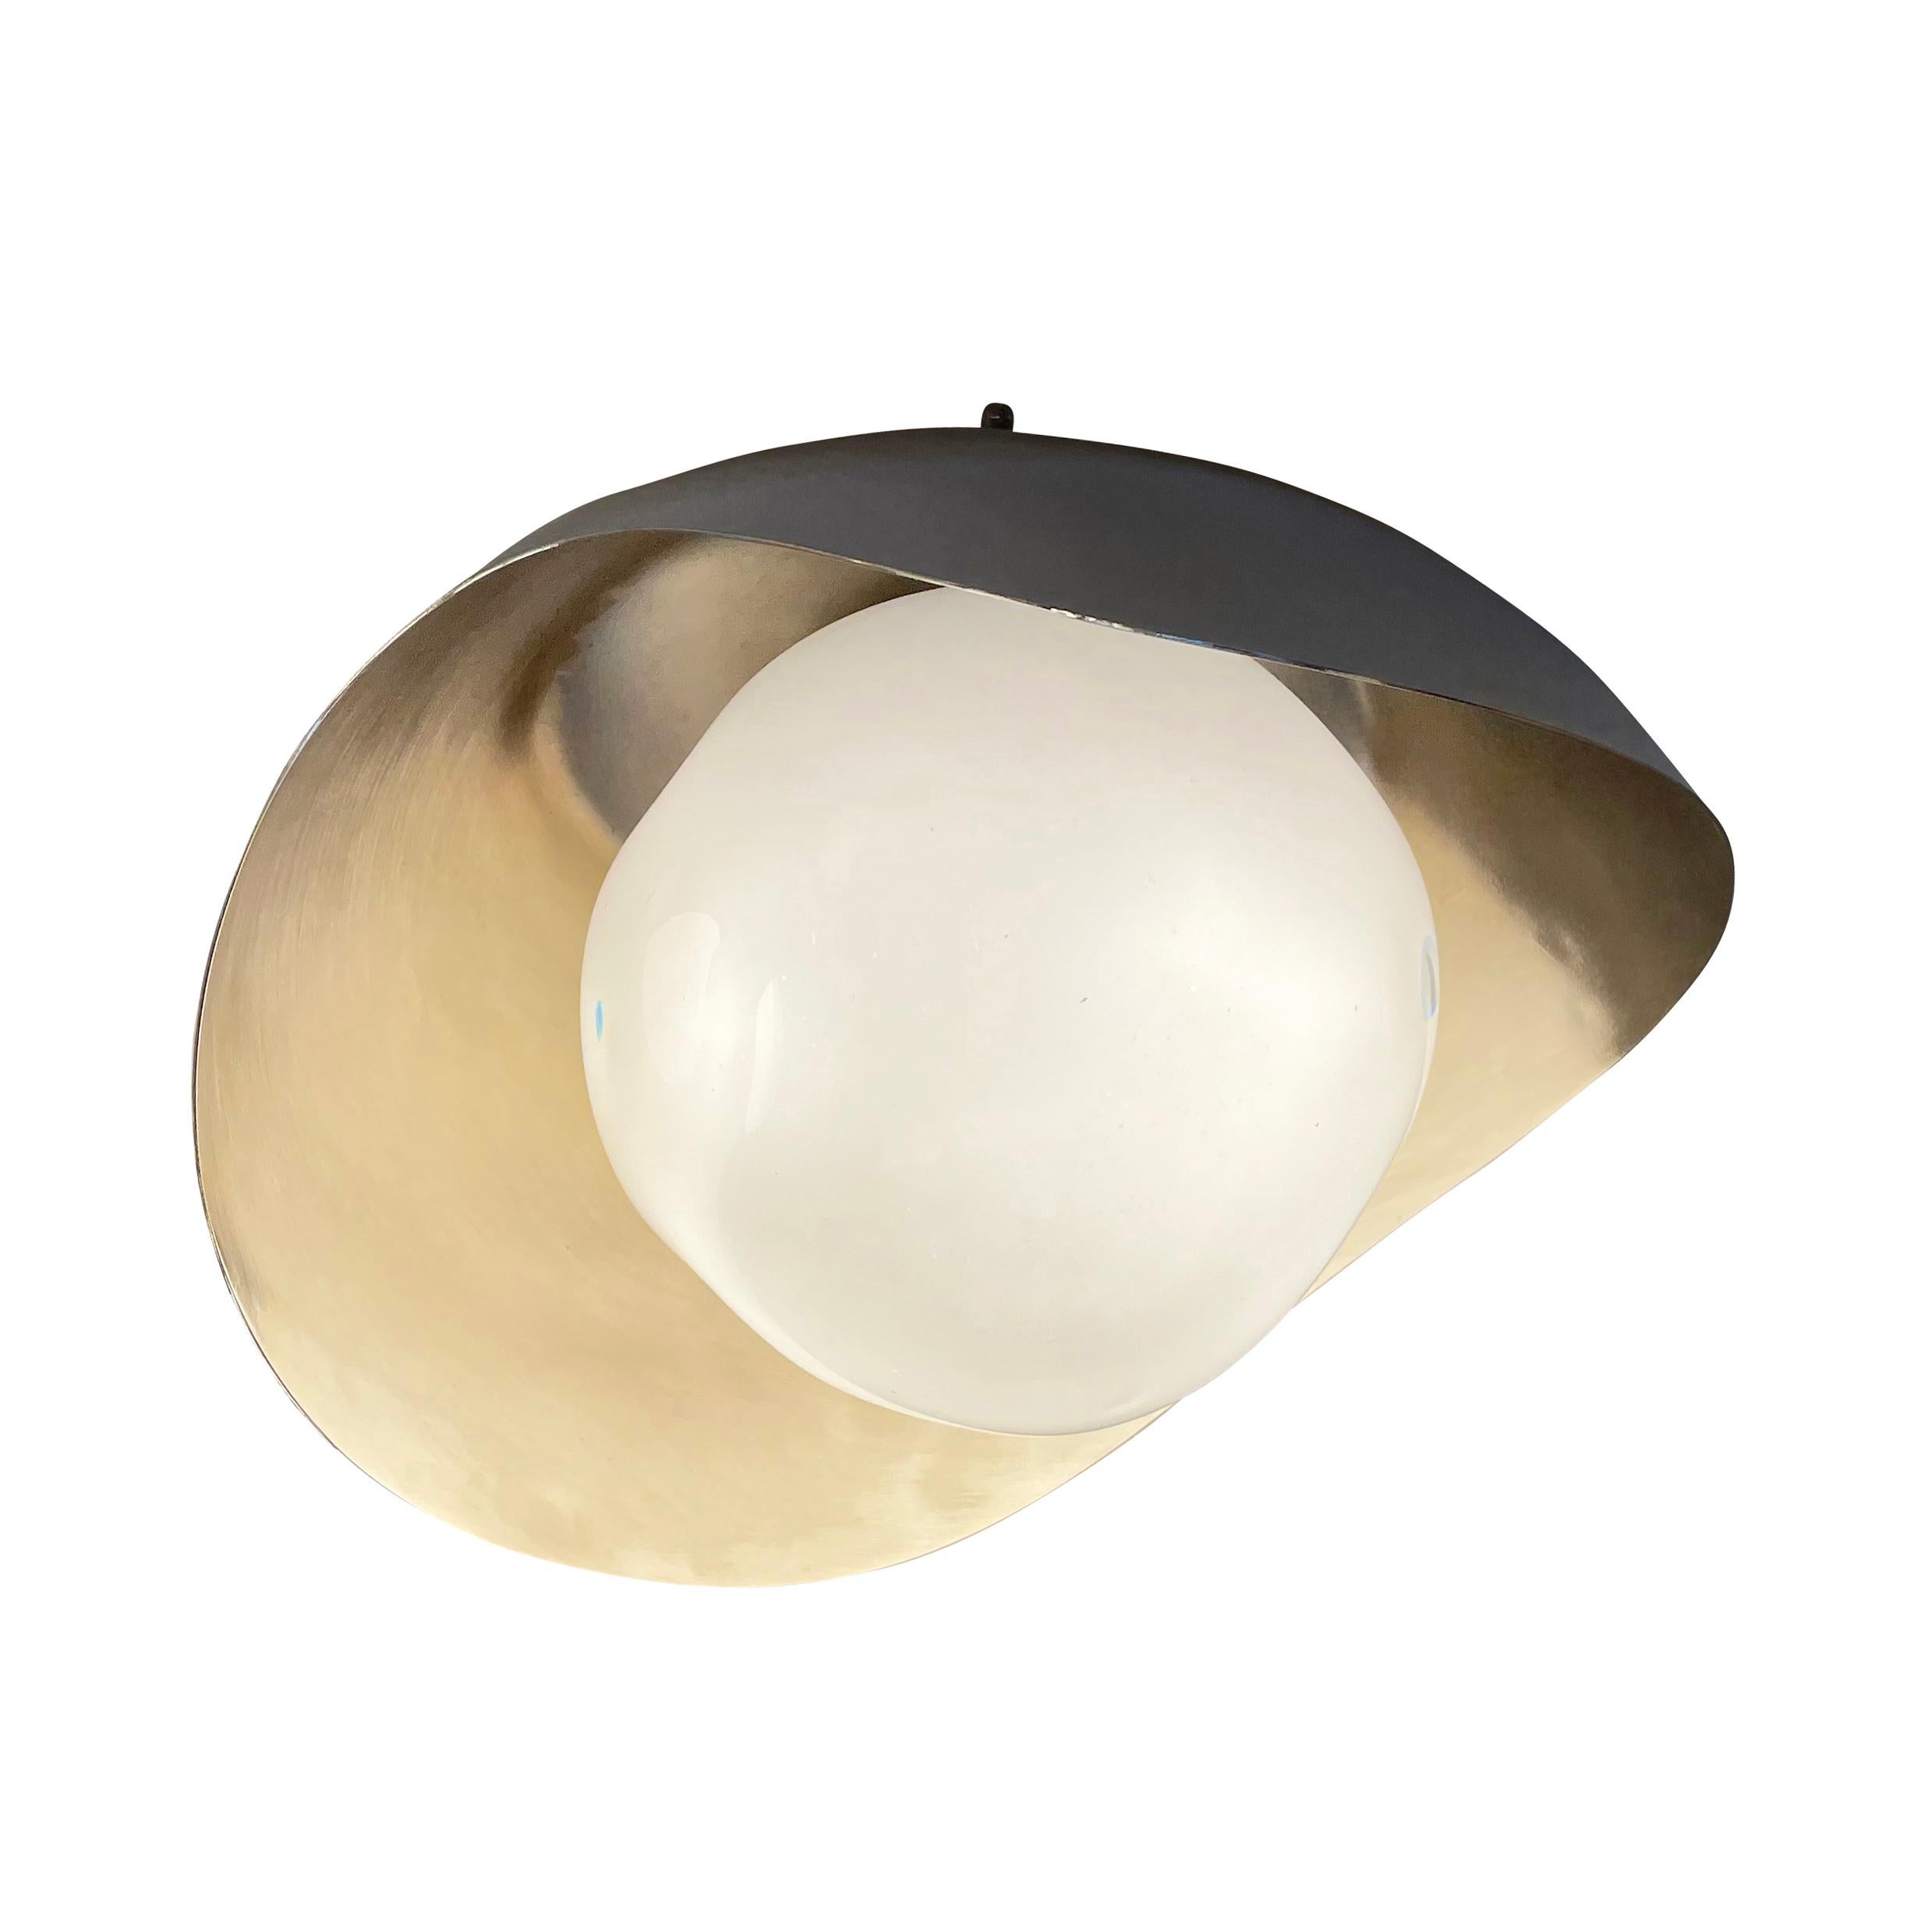 Perla Flushmount Ceiling Light by Gaspare Asaro-Nickel Version In New Condition For Sale In New York, NY